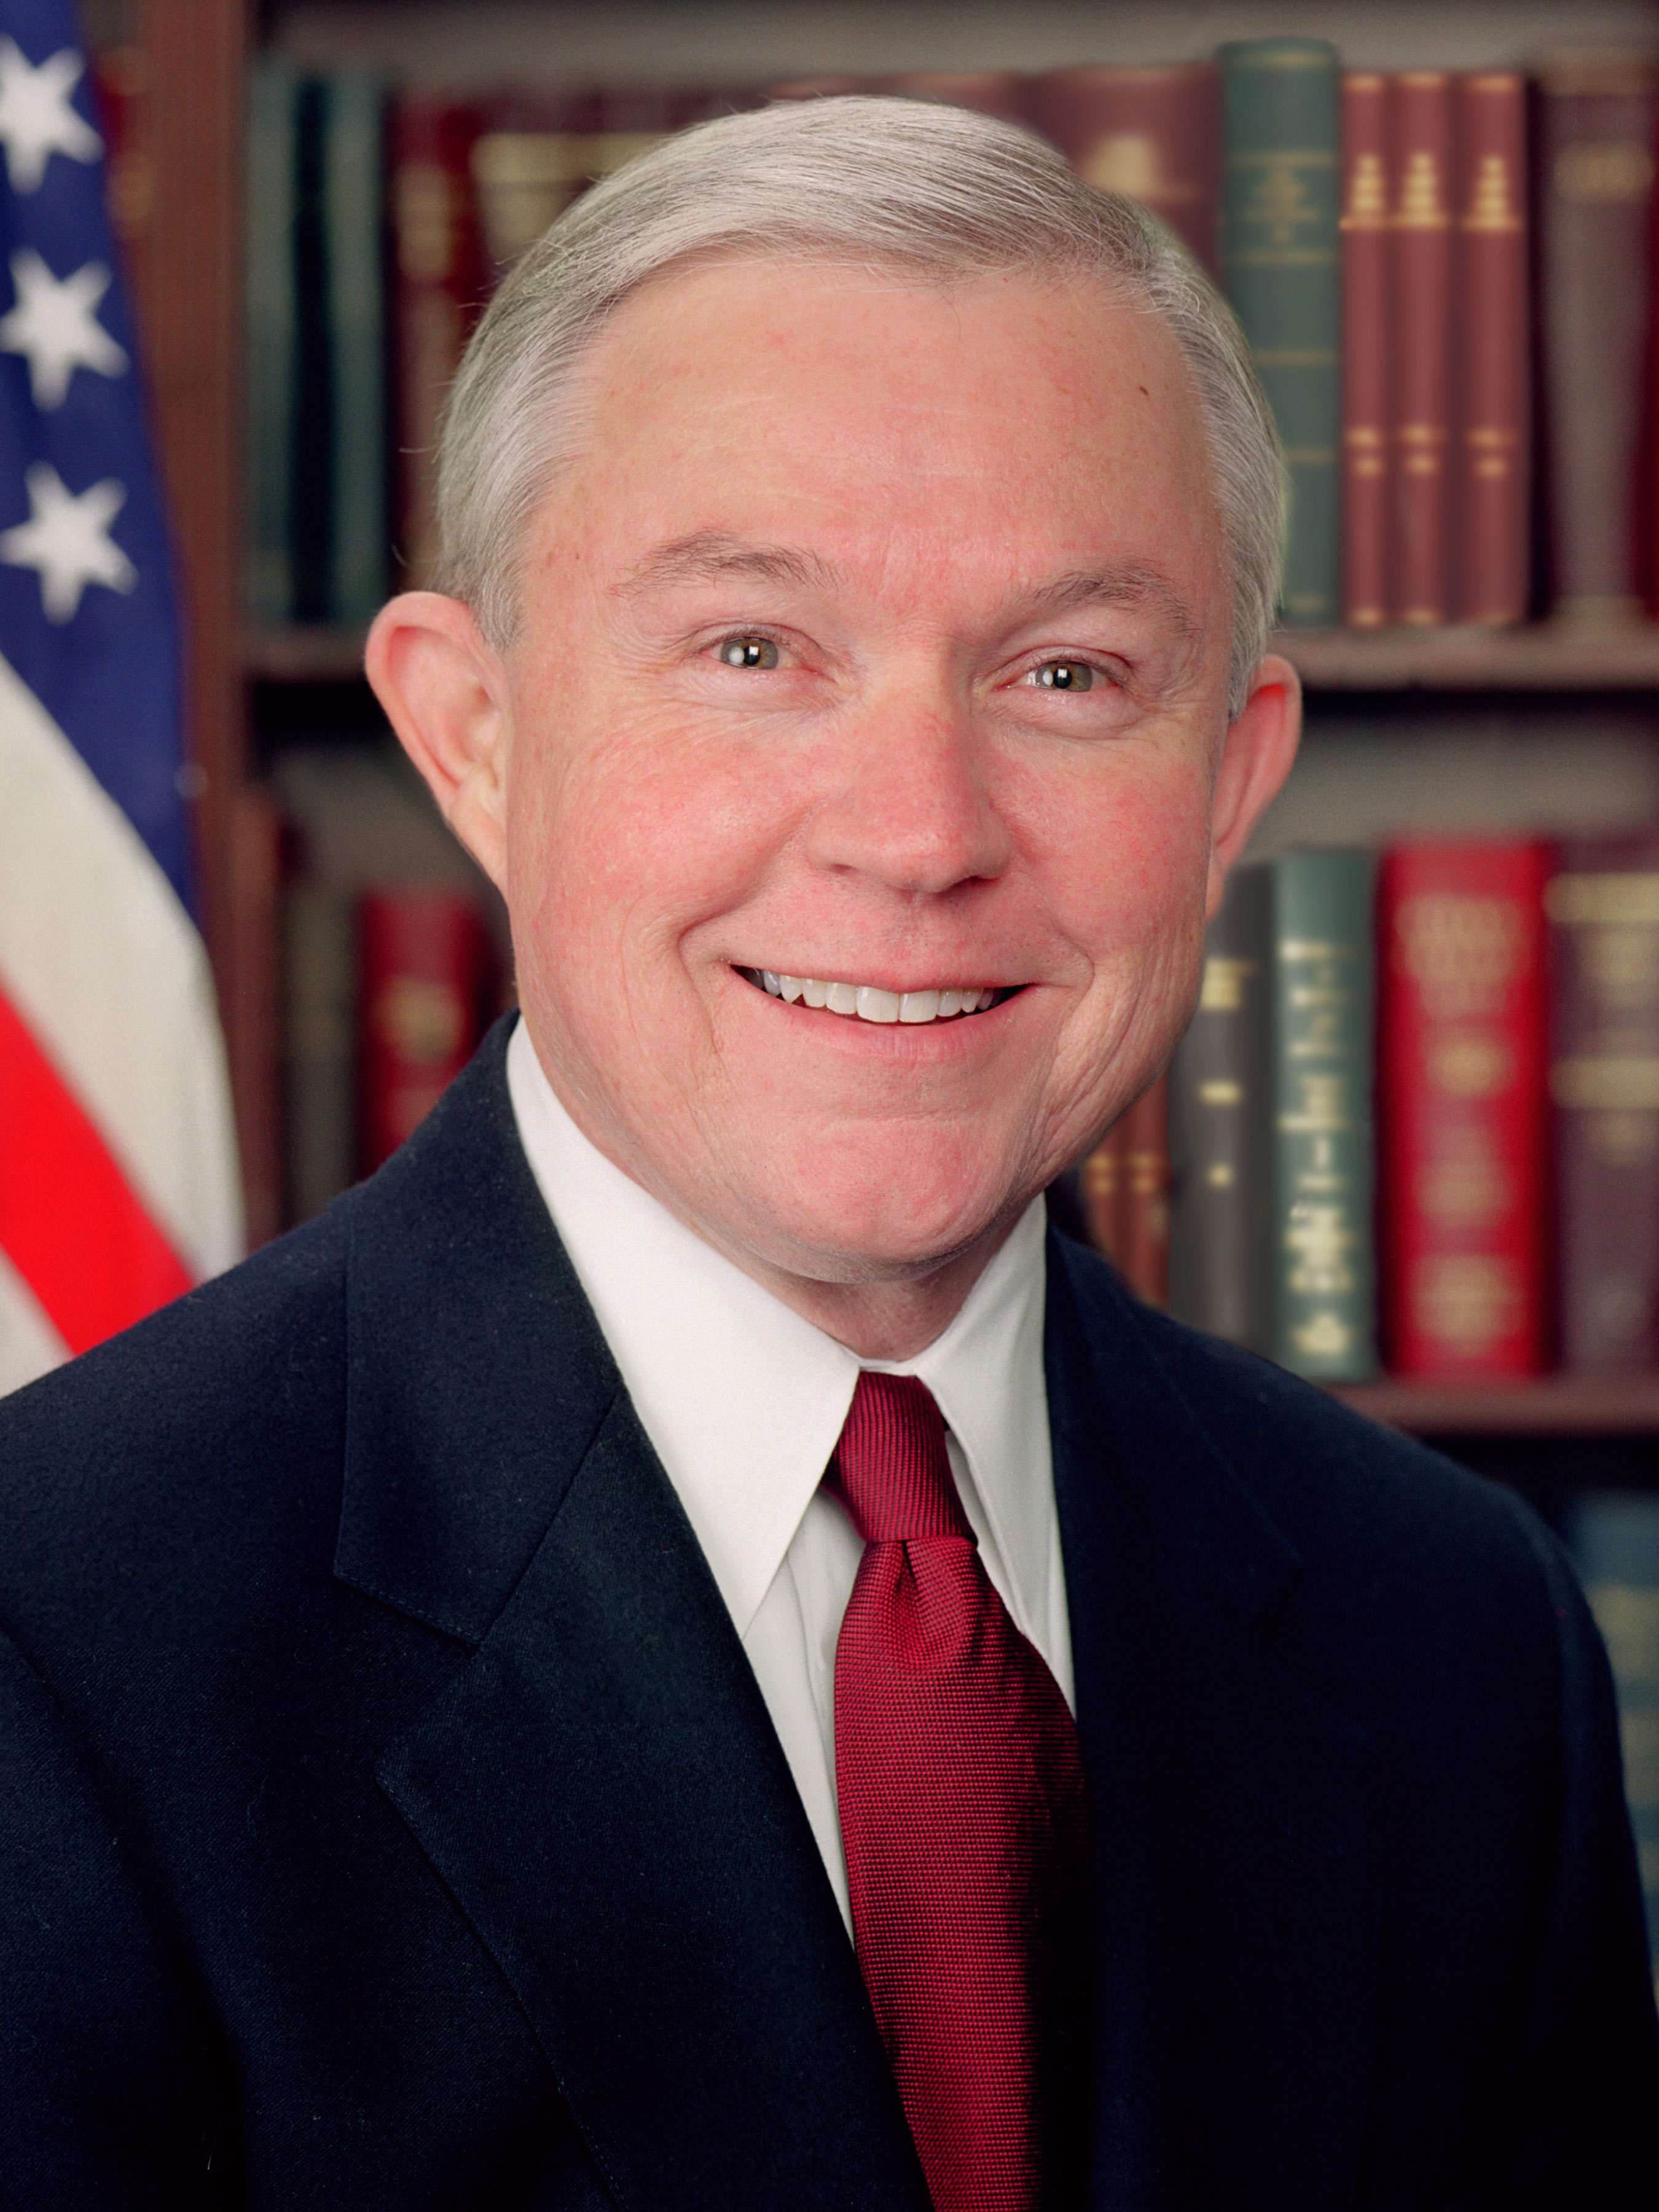 Nation: Jeff Sessions has resigned from the position of Attorney General